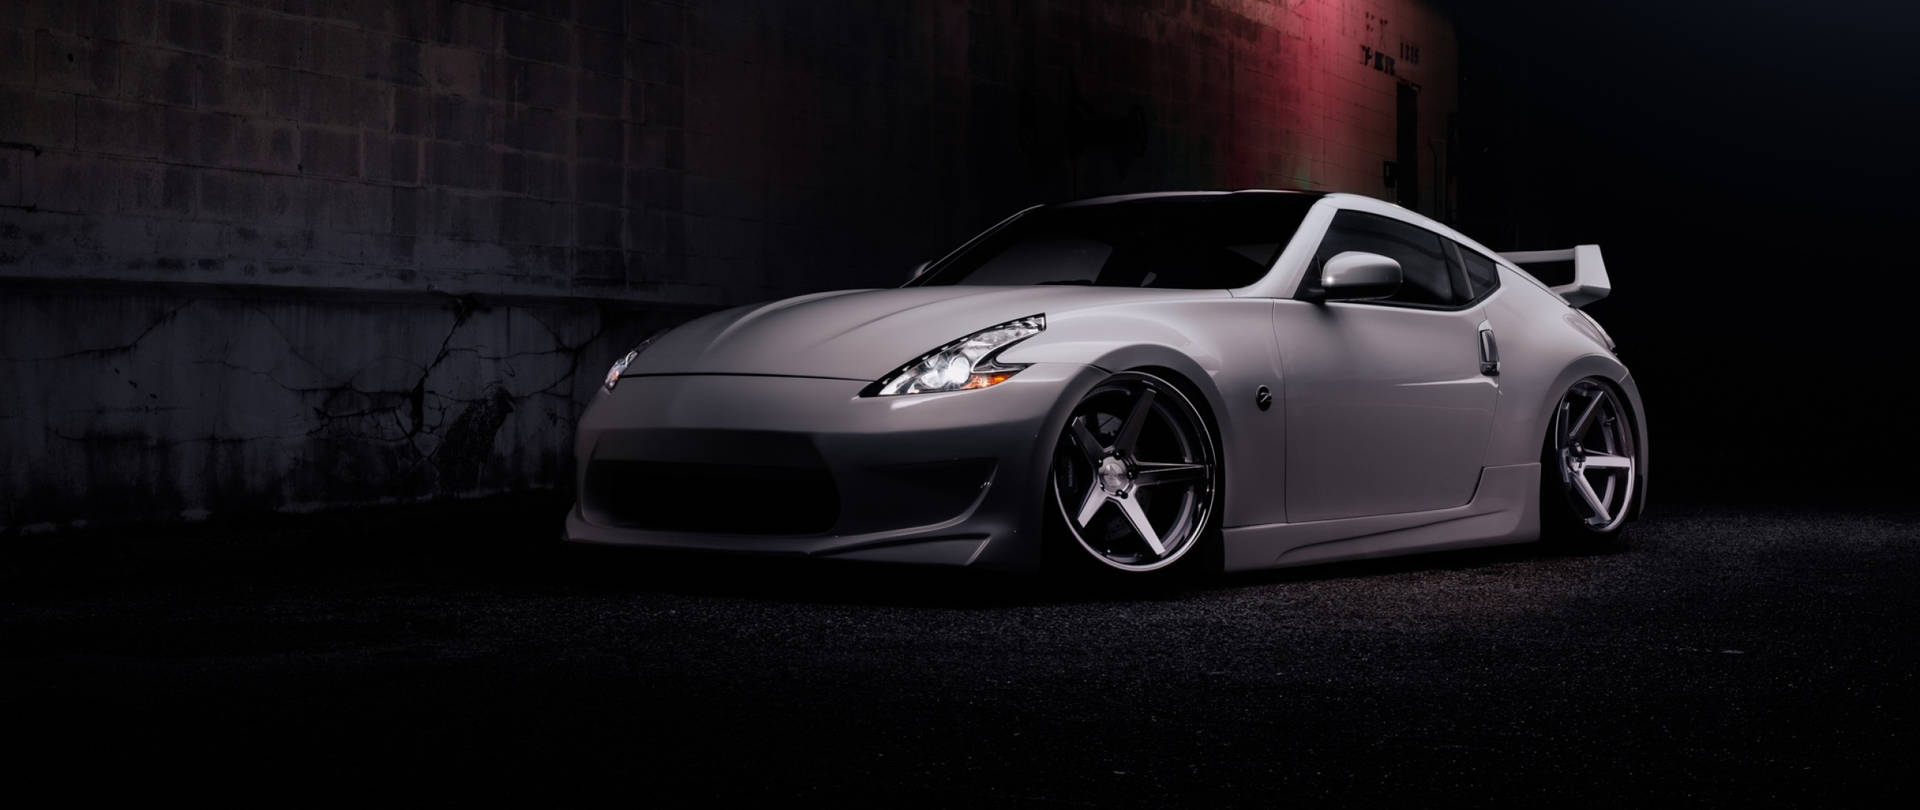 The Iconic Nissan 370Z Wallpaper